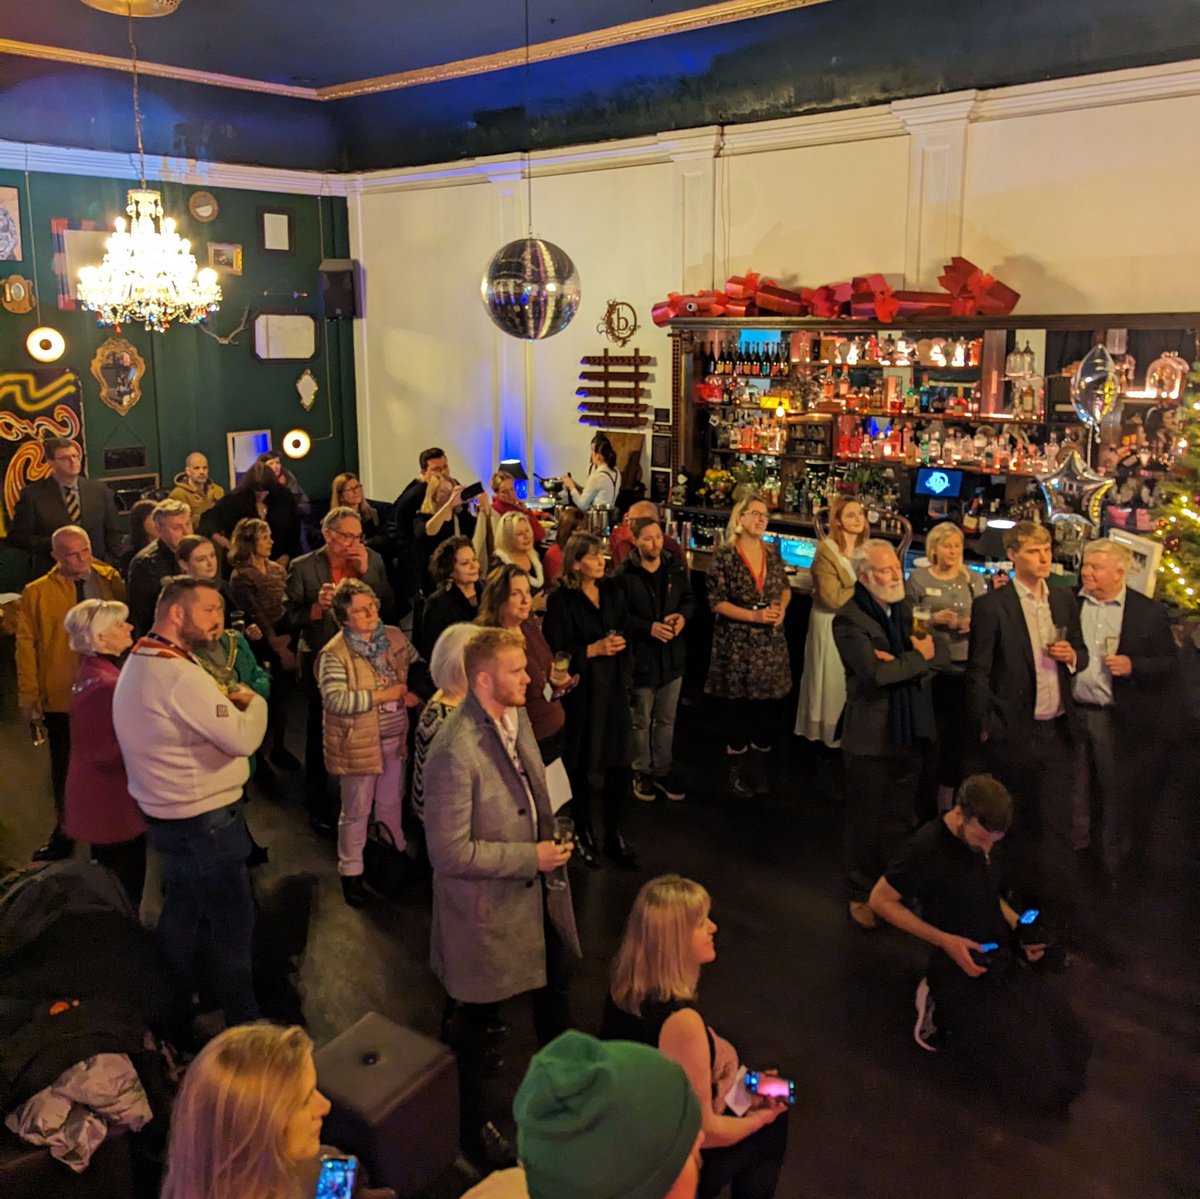 Thank you to everyone who attended our Christmas networking event! We raised more than £700 for Catching Lives through our raffle. Thanks to Simon at The Ballroom for hosting, our sponsors Girlings, Steve Lilley for the quiz, and to everyone for joining the fun!